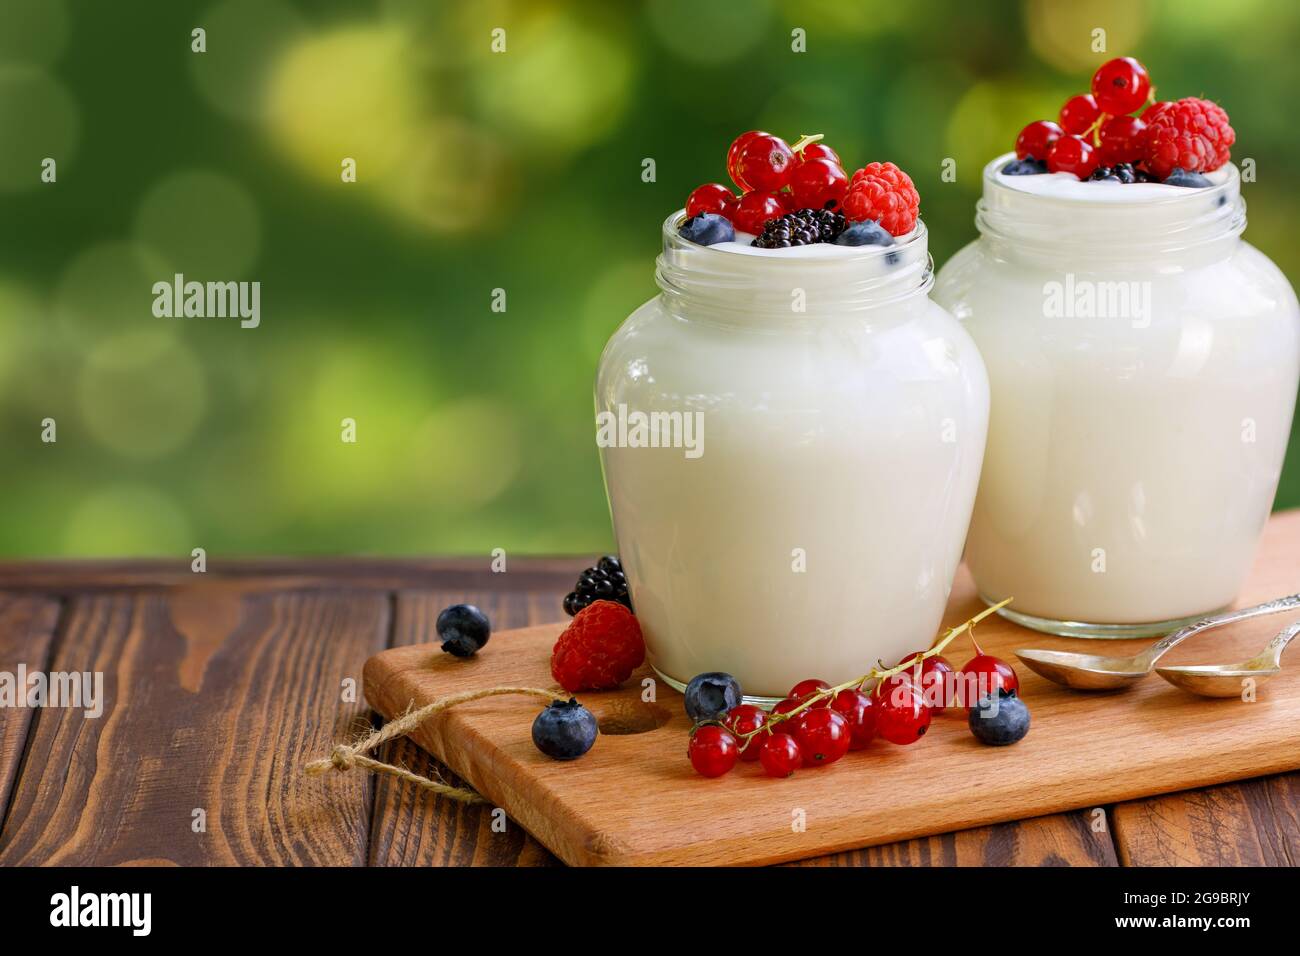 yogurt and fresh berries in two glass jars on table outdoors Stock Photo